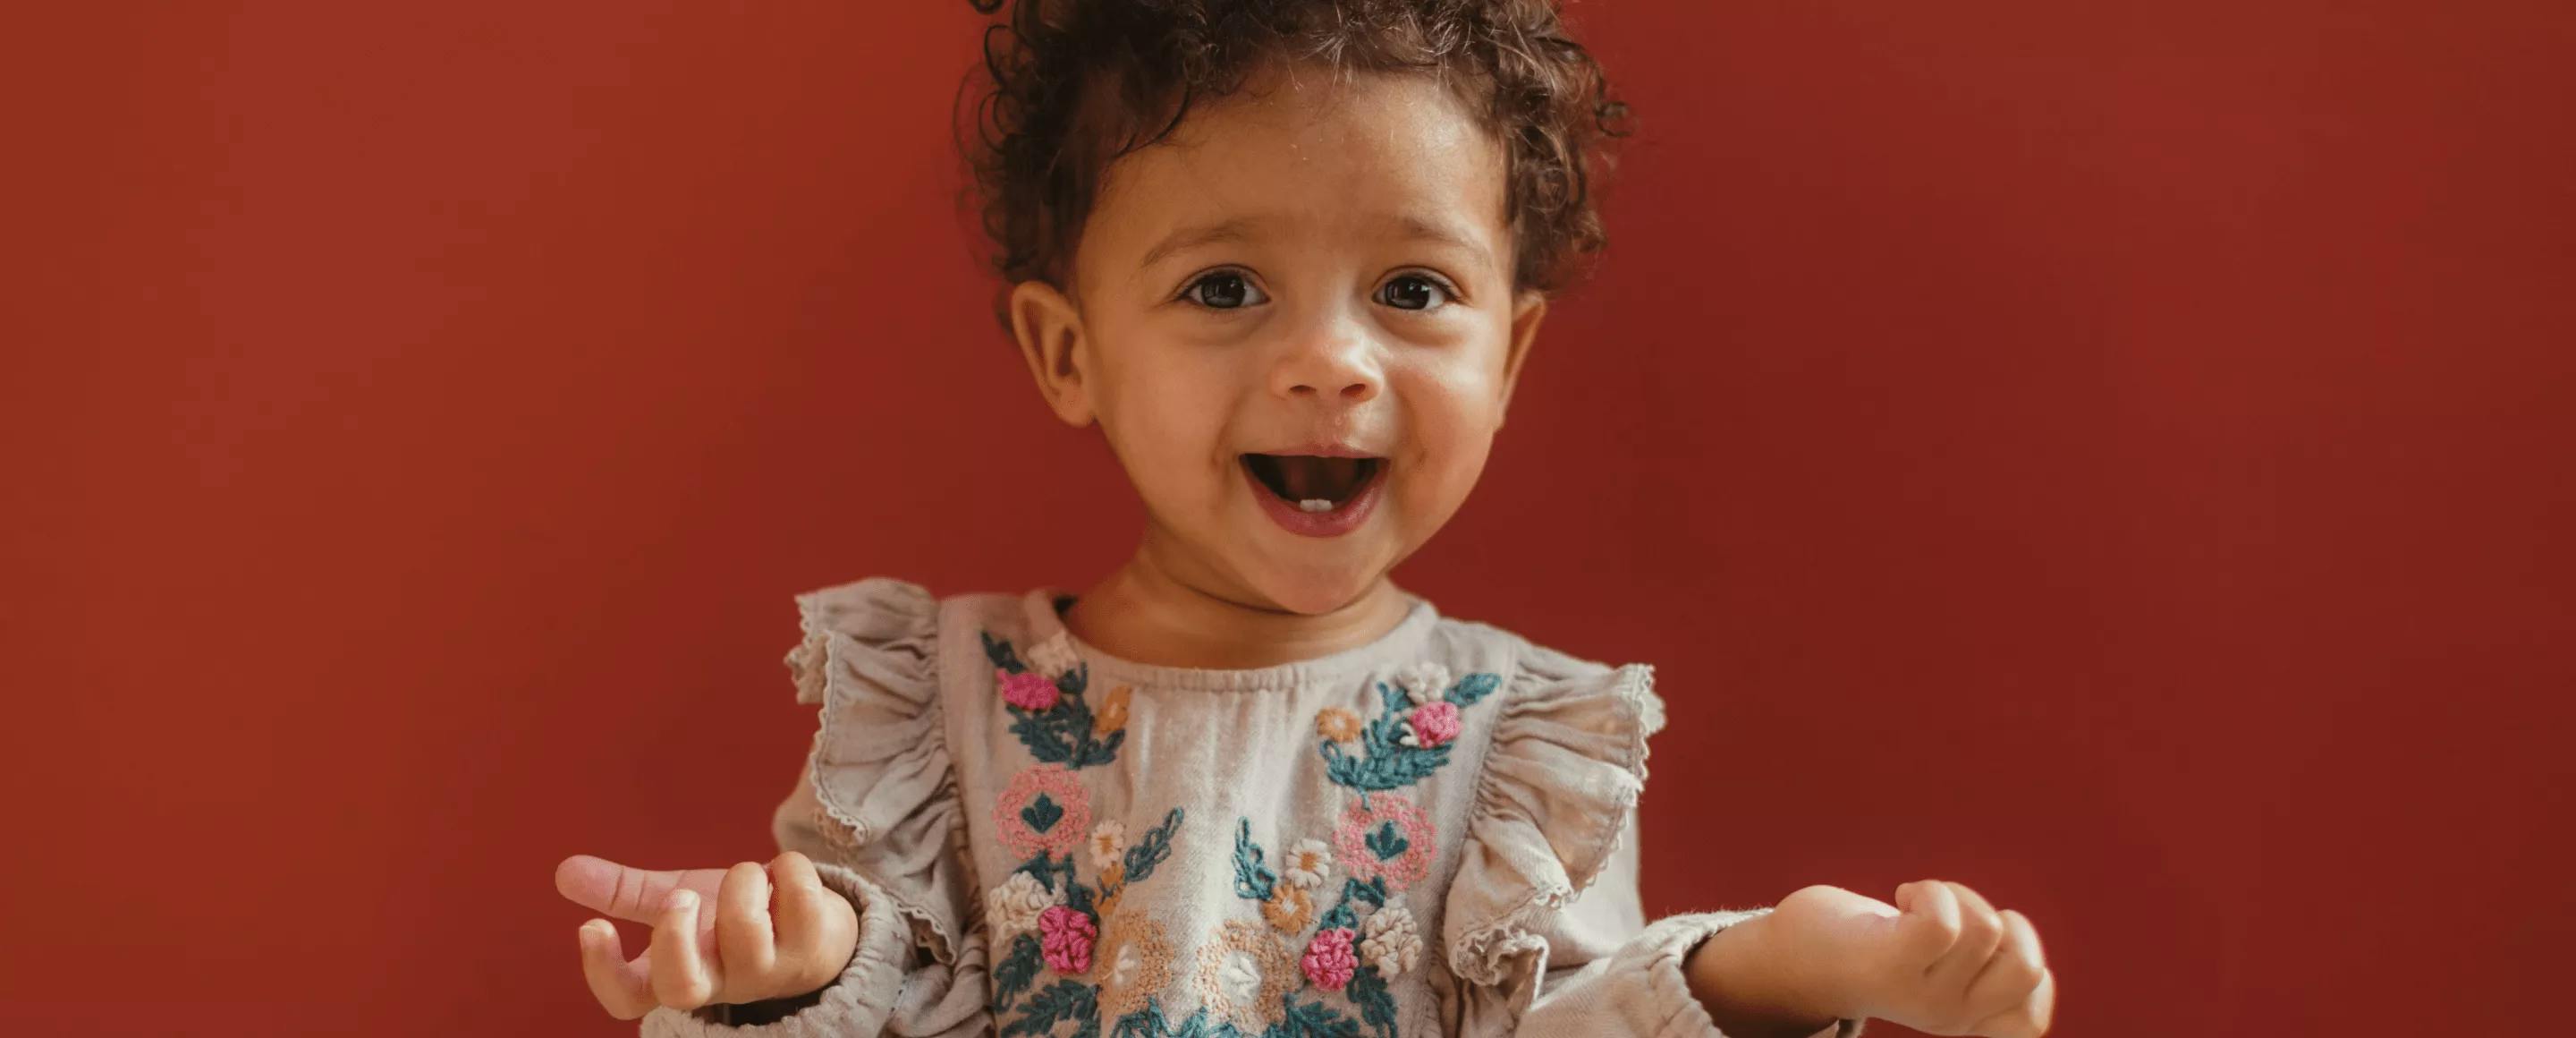 female baby wearing dress and laughing